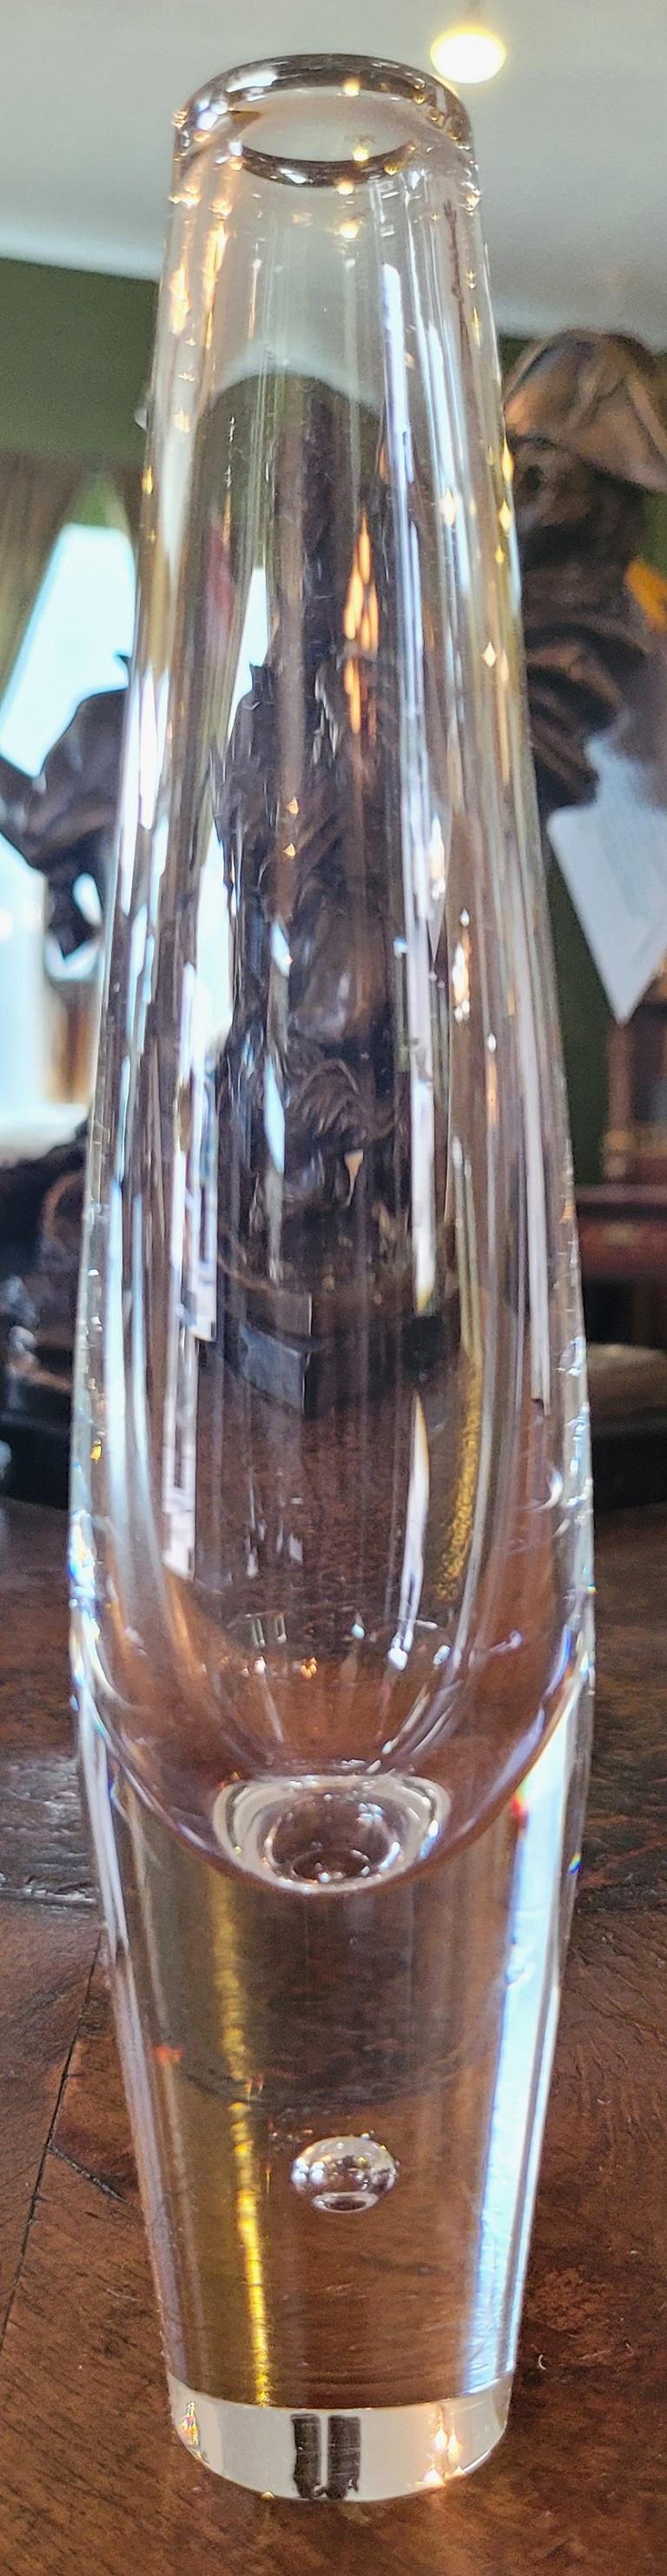 PRESENTING A LOVELY Mid Century Steuben 8.5 inch Teardrop Bud Vase.

Made by the renowned and highly desirable ‘Steuben’ Glass Works in NY circa 1960-80.

In near mint condition with no chips or cracks.

The vase has a teardrop bubble in the base,